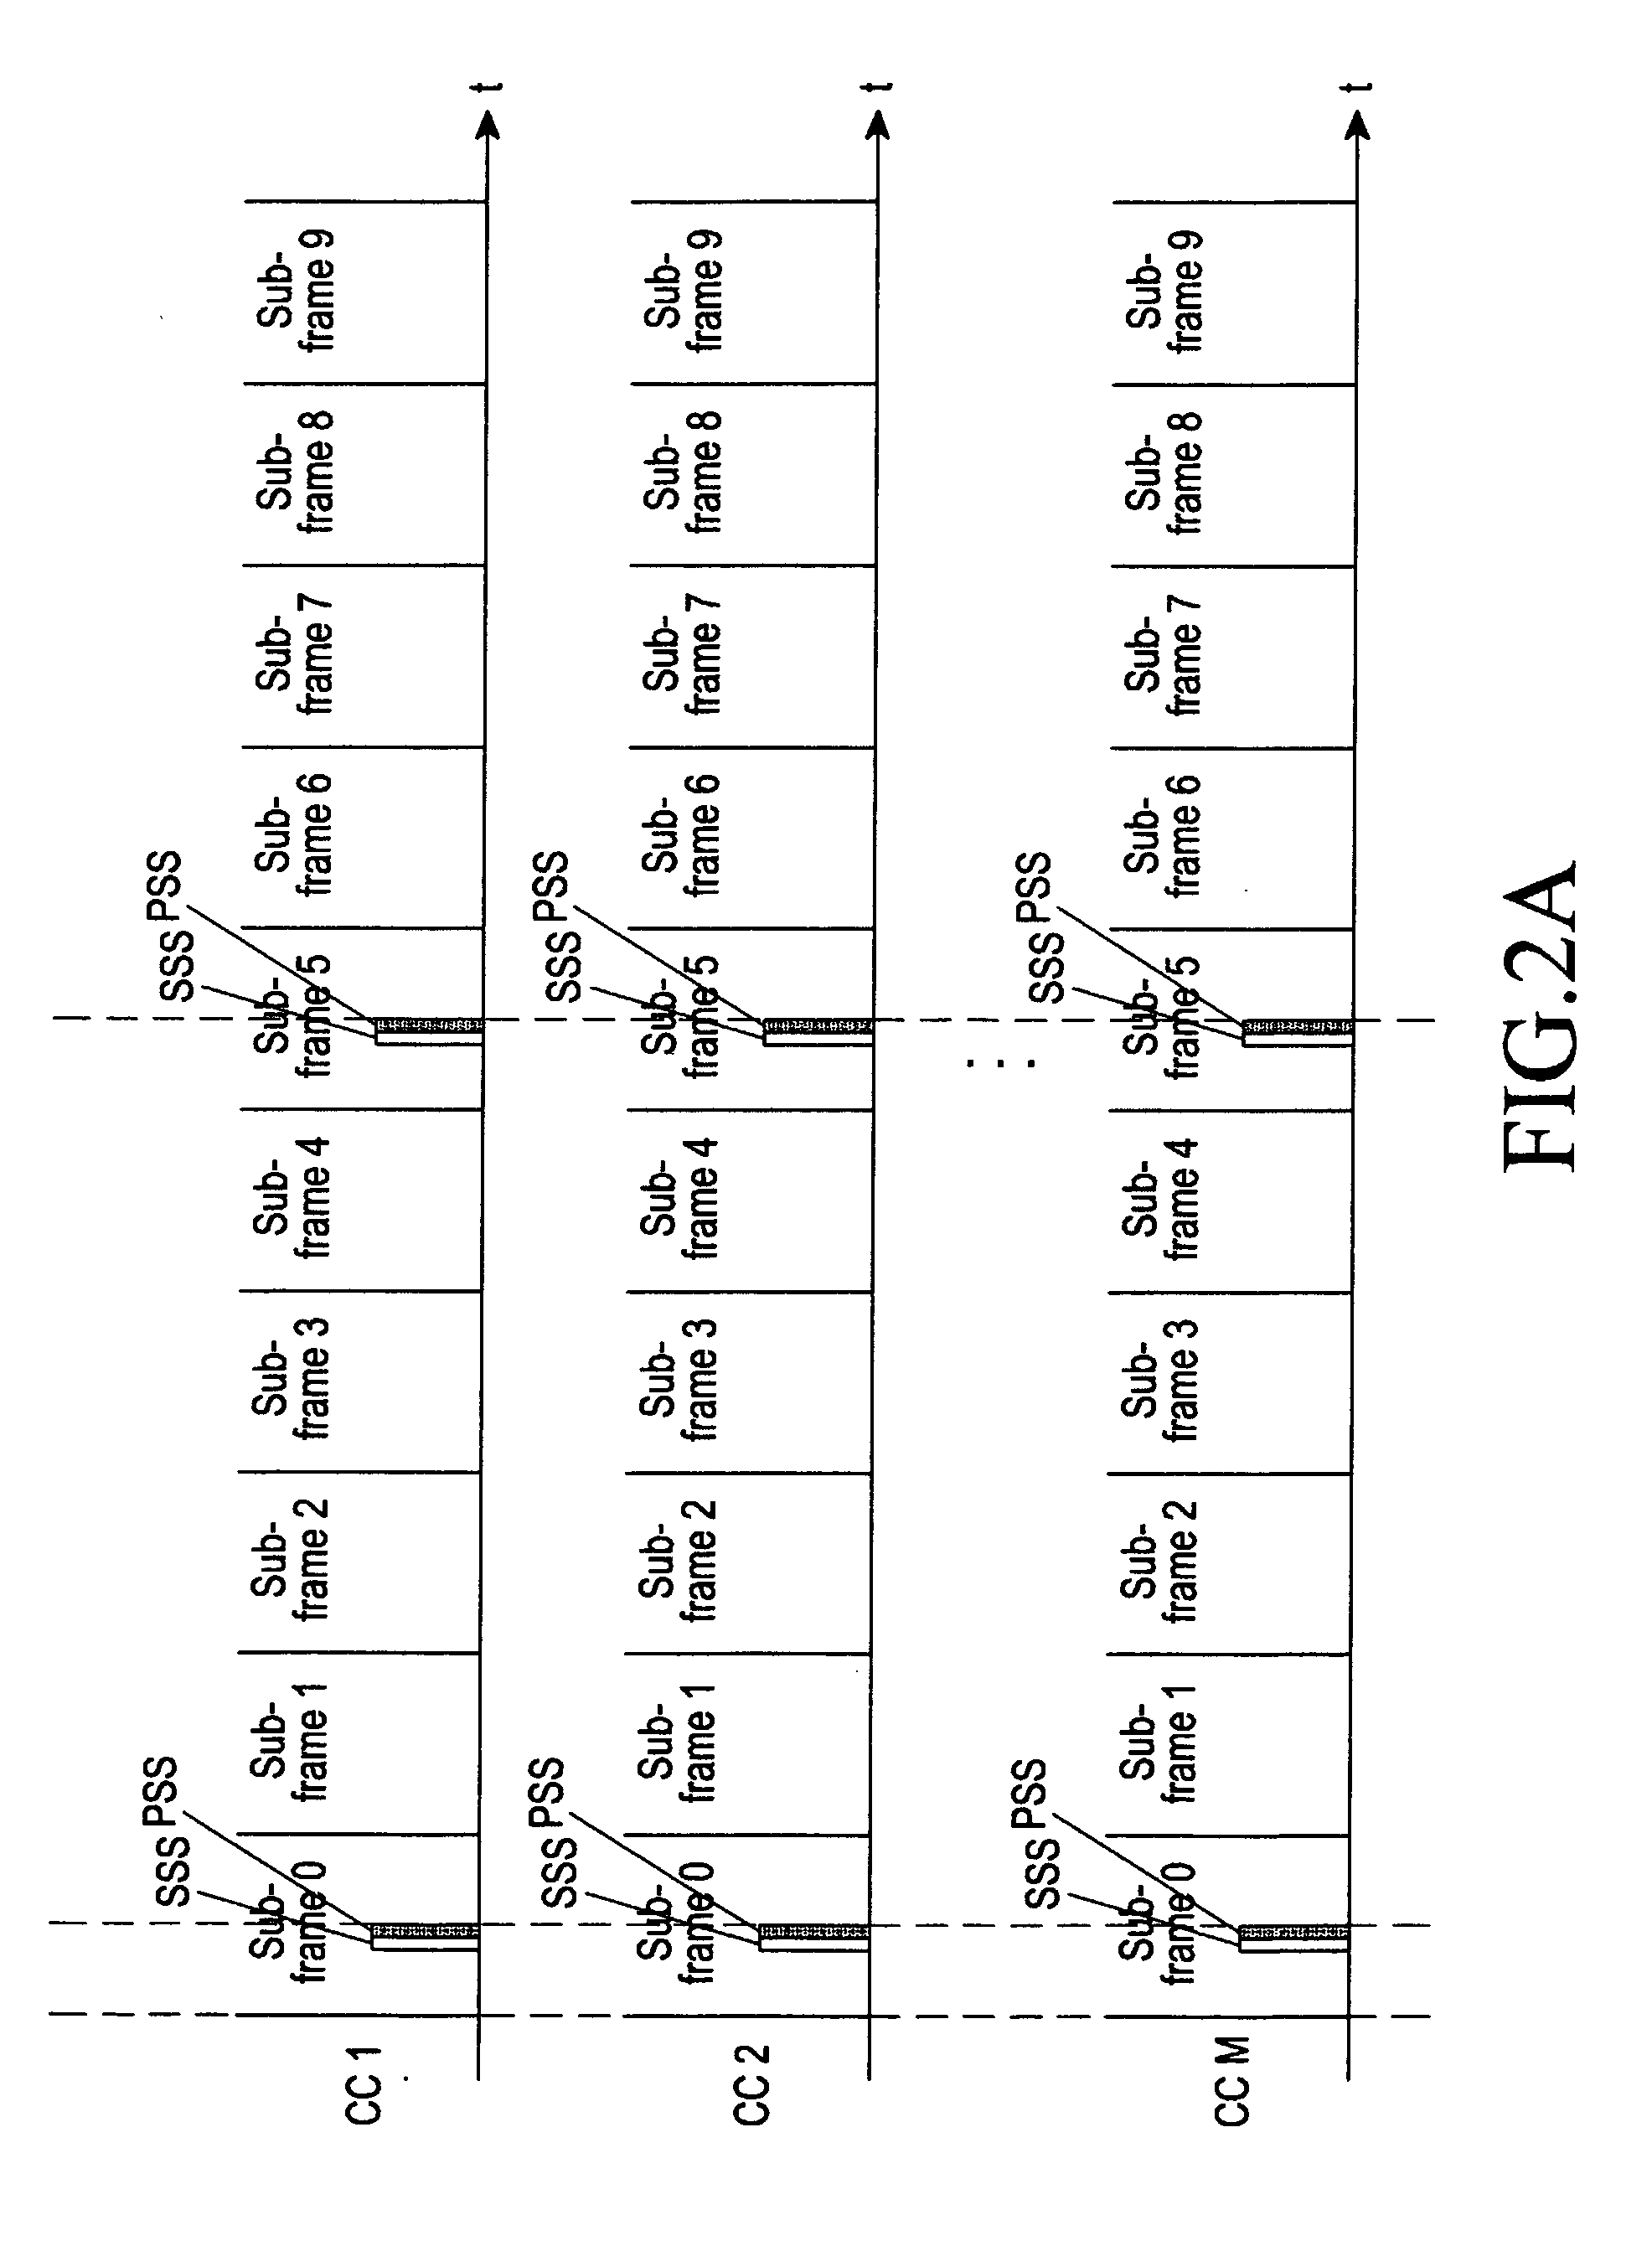 Mobility cell measurement method and apparatus for mobile communications system